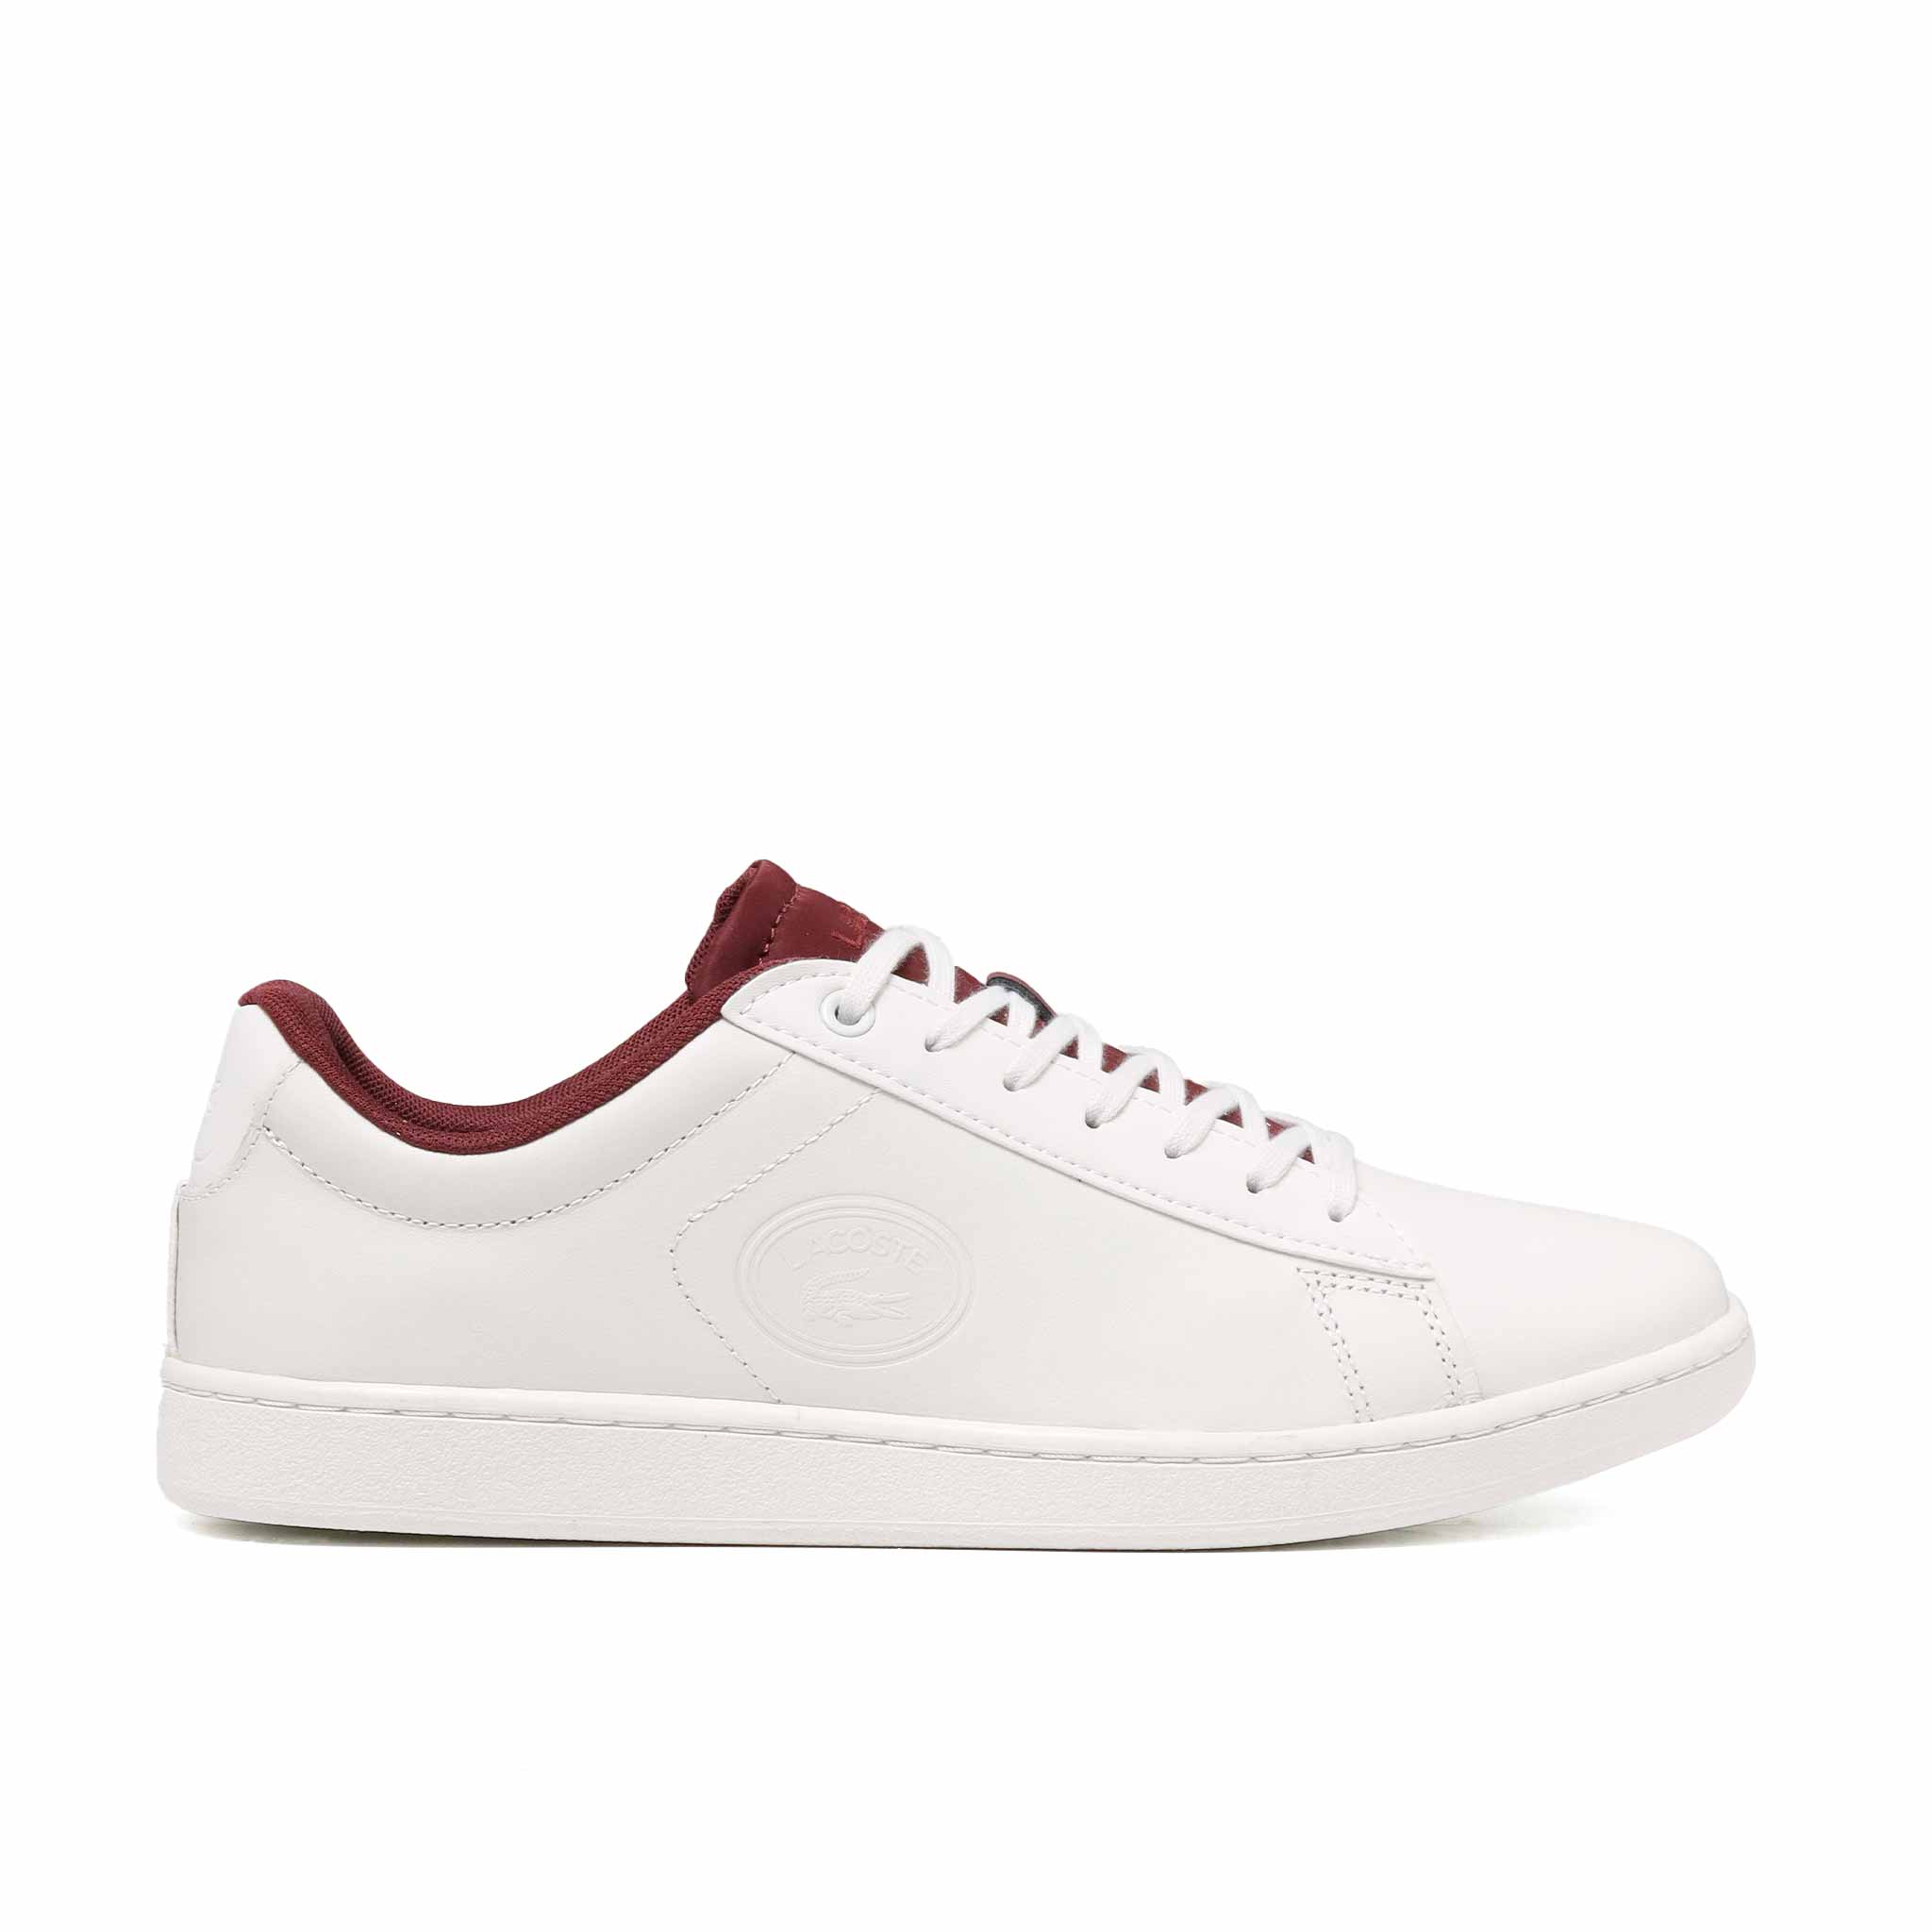 Lacoste Evo Mujer 736SPW0016OW9 Casual Blanco